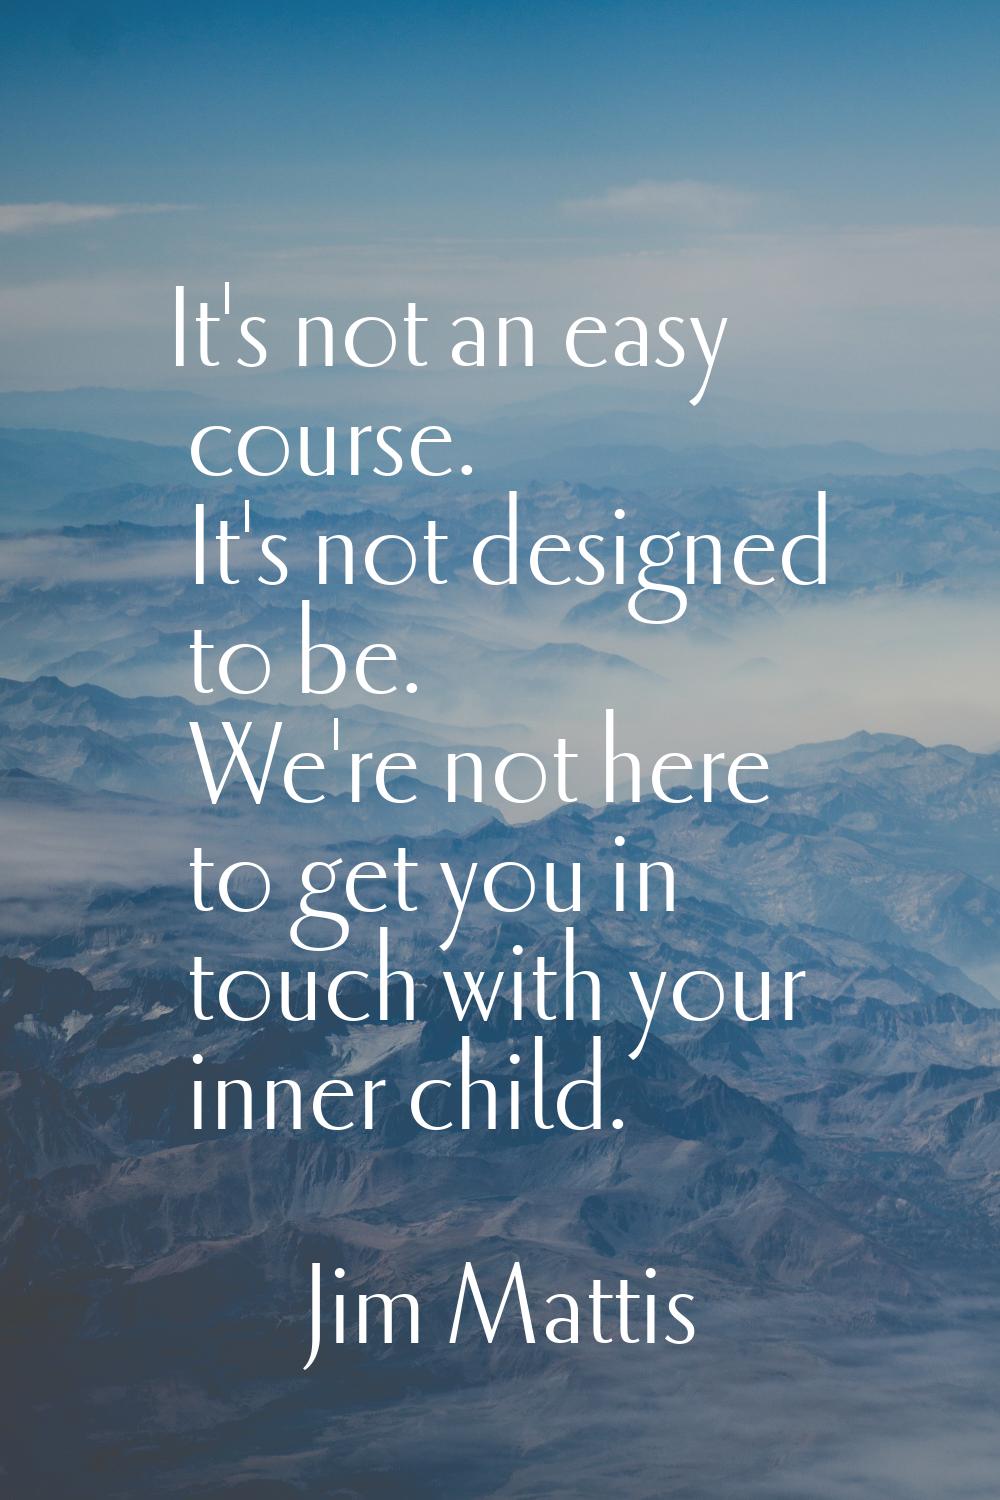 It's not an easy course. It's not designed to be. We're not here to get you in touch with your inne